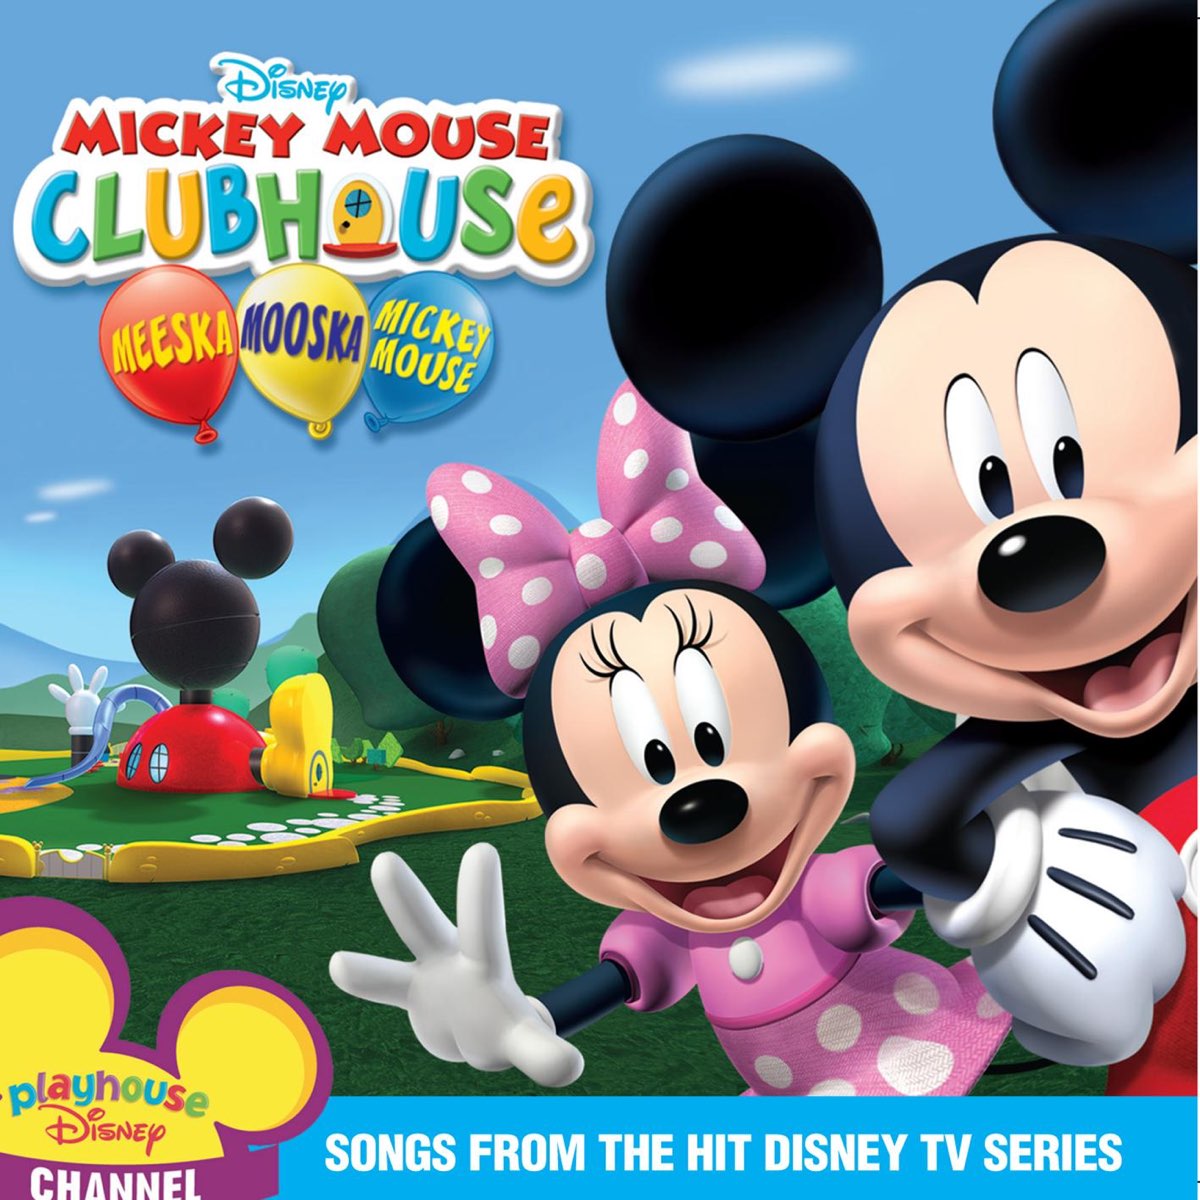 Mickey Mouse Clubhouse: Vol. 3 – TV on Google Play